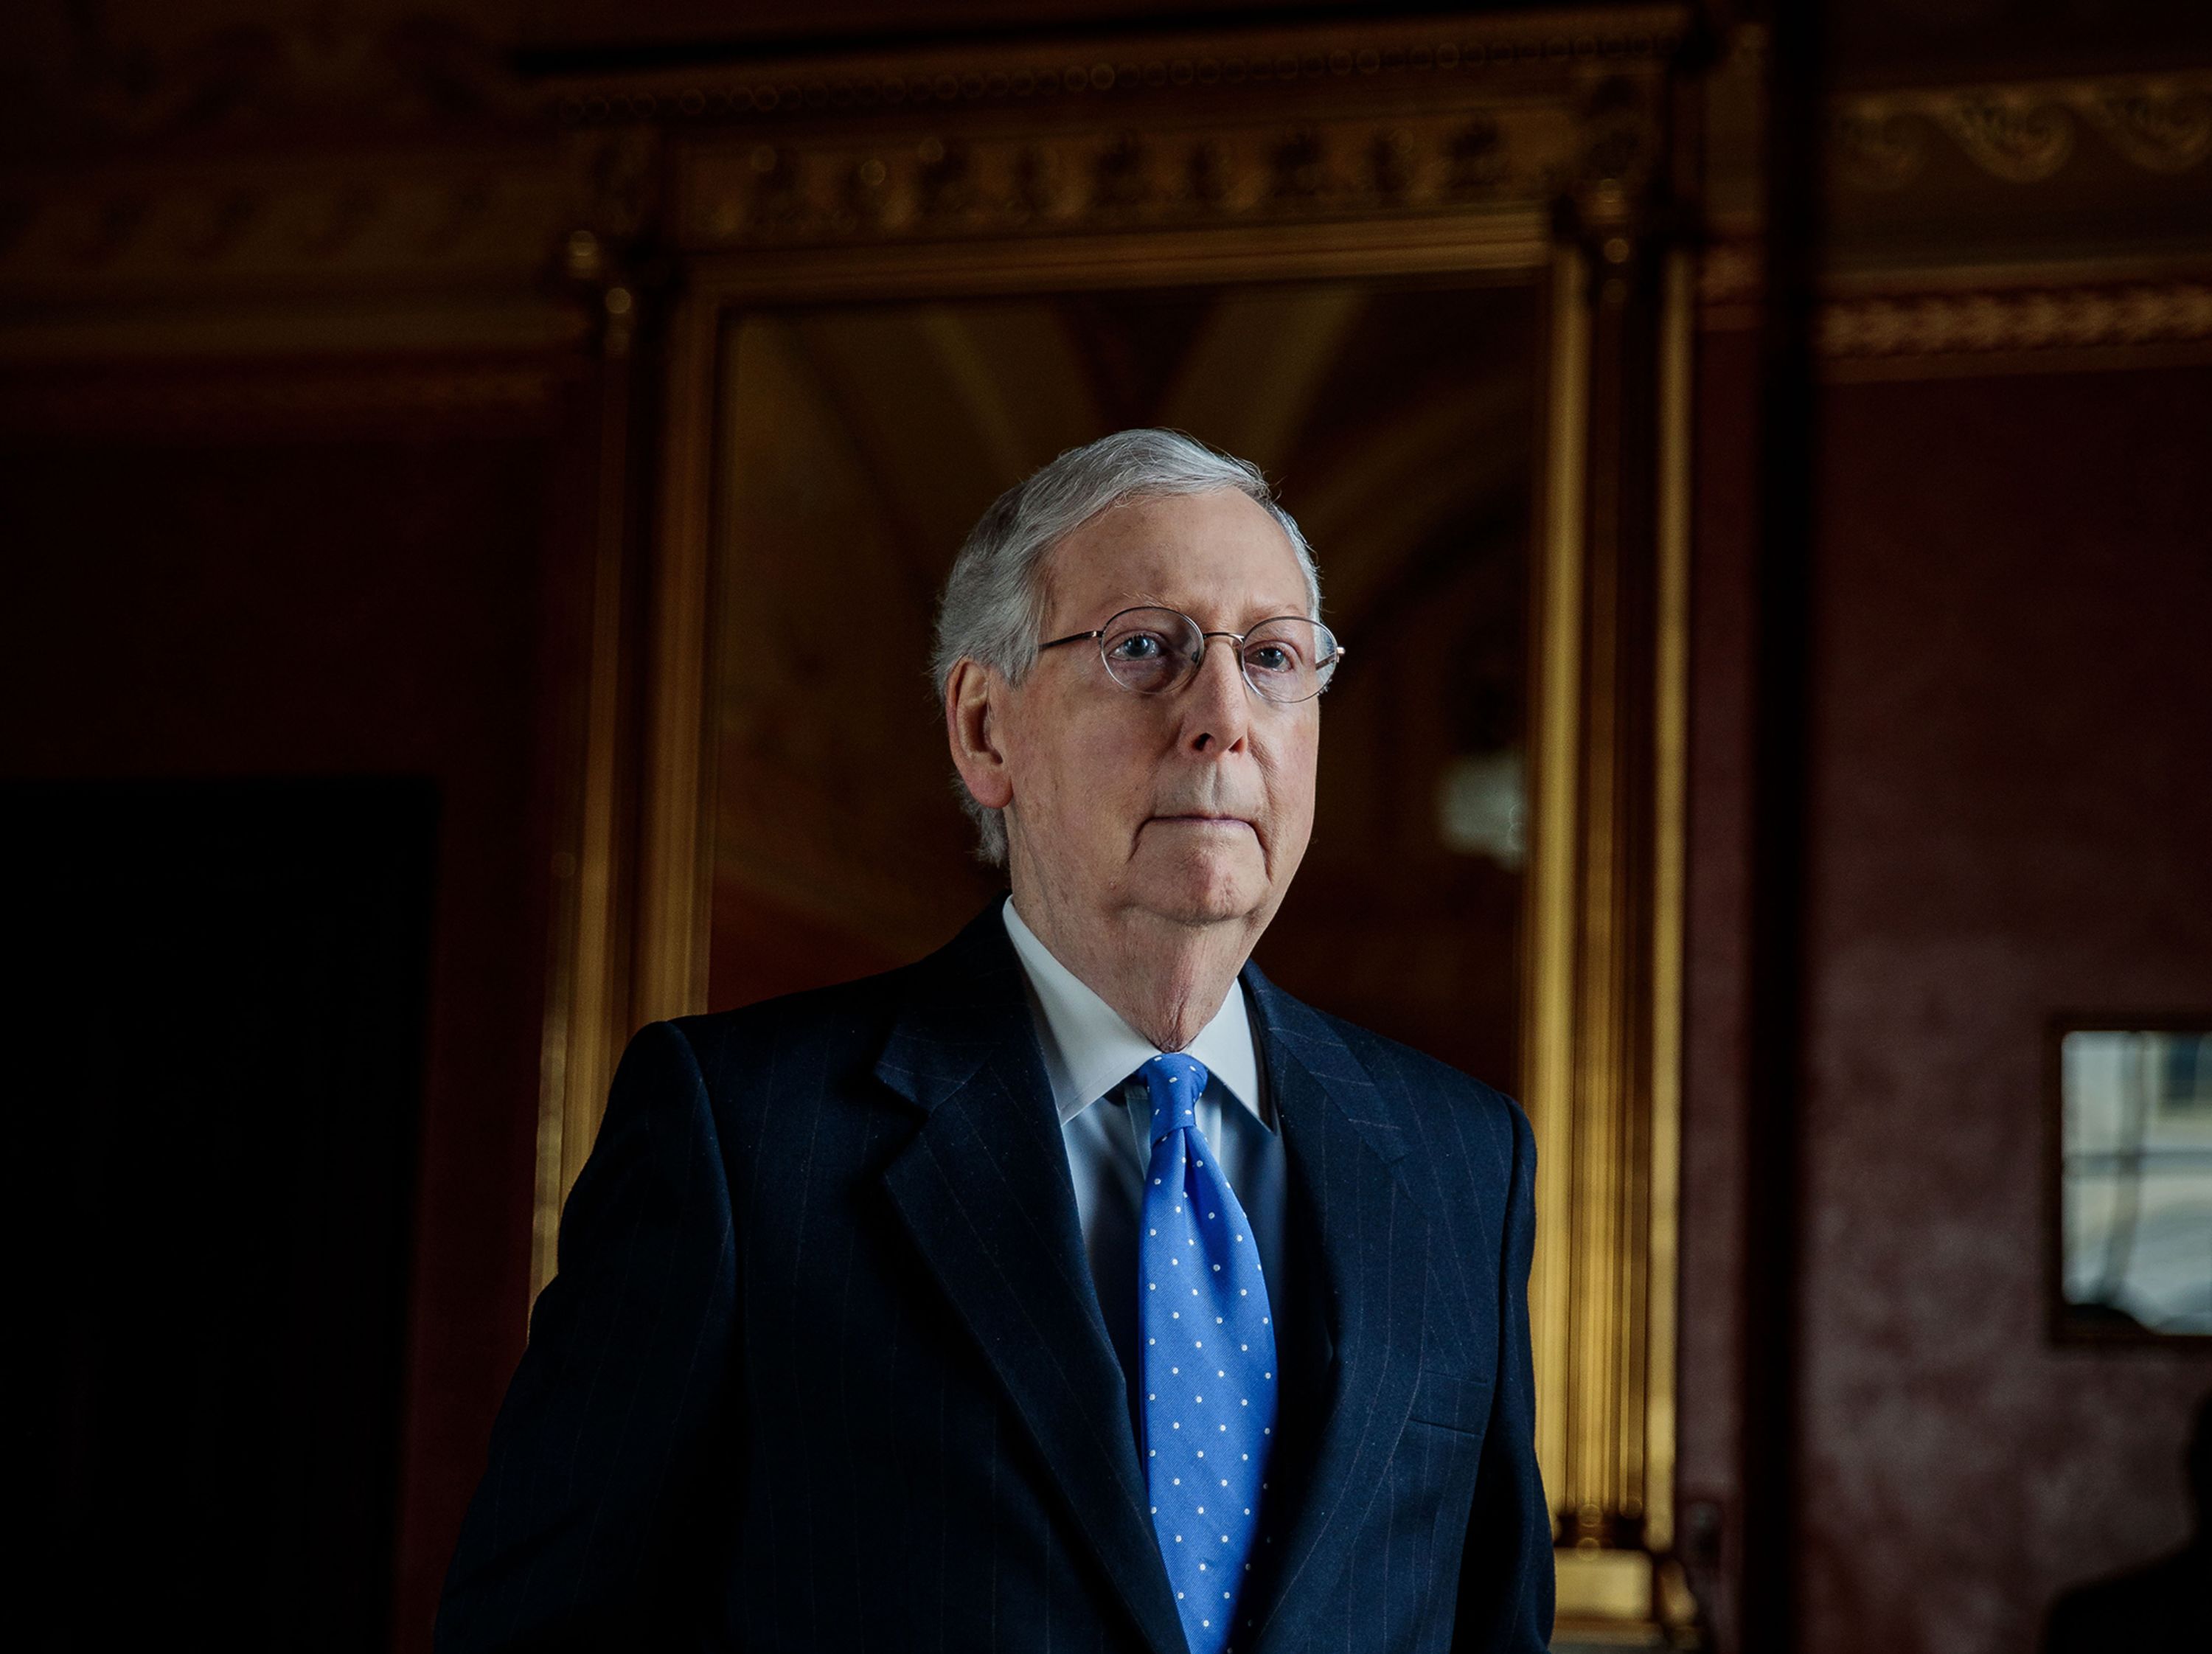 US Sen. Mitch McConnell is photographed at the US Capitol in 2018.